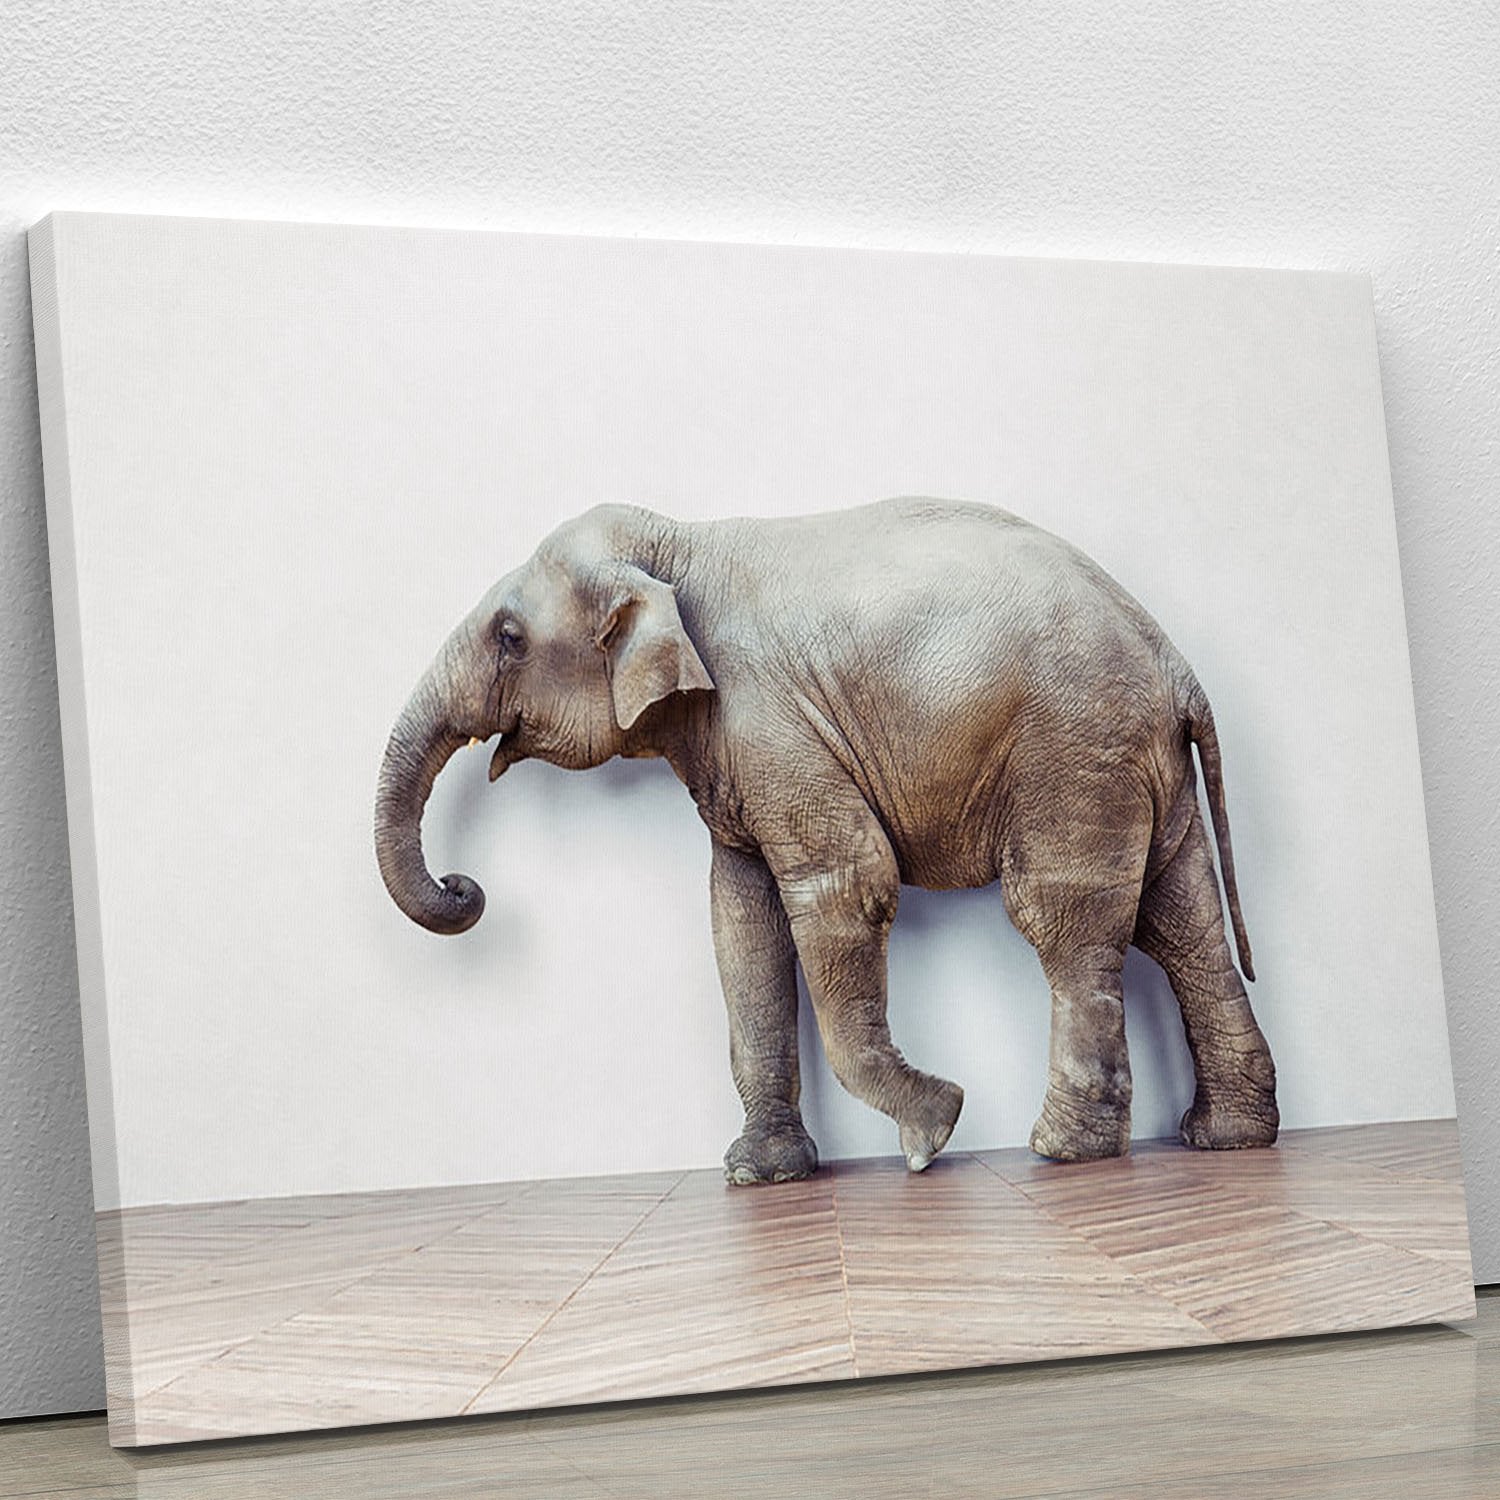 The elephant calm in the room near white wall Canvas Print or Poster